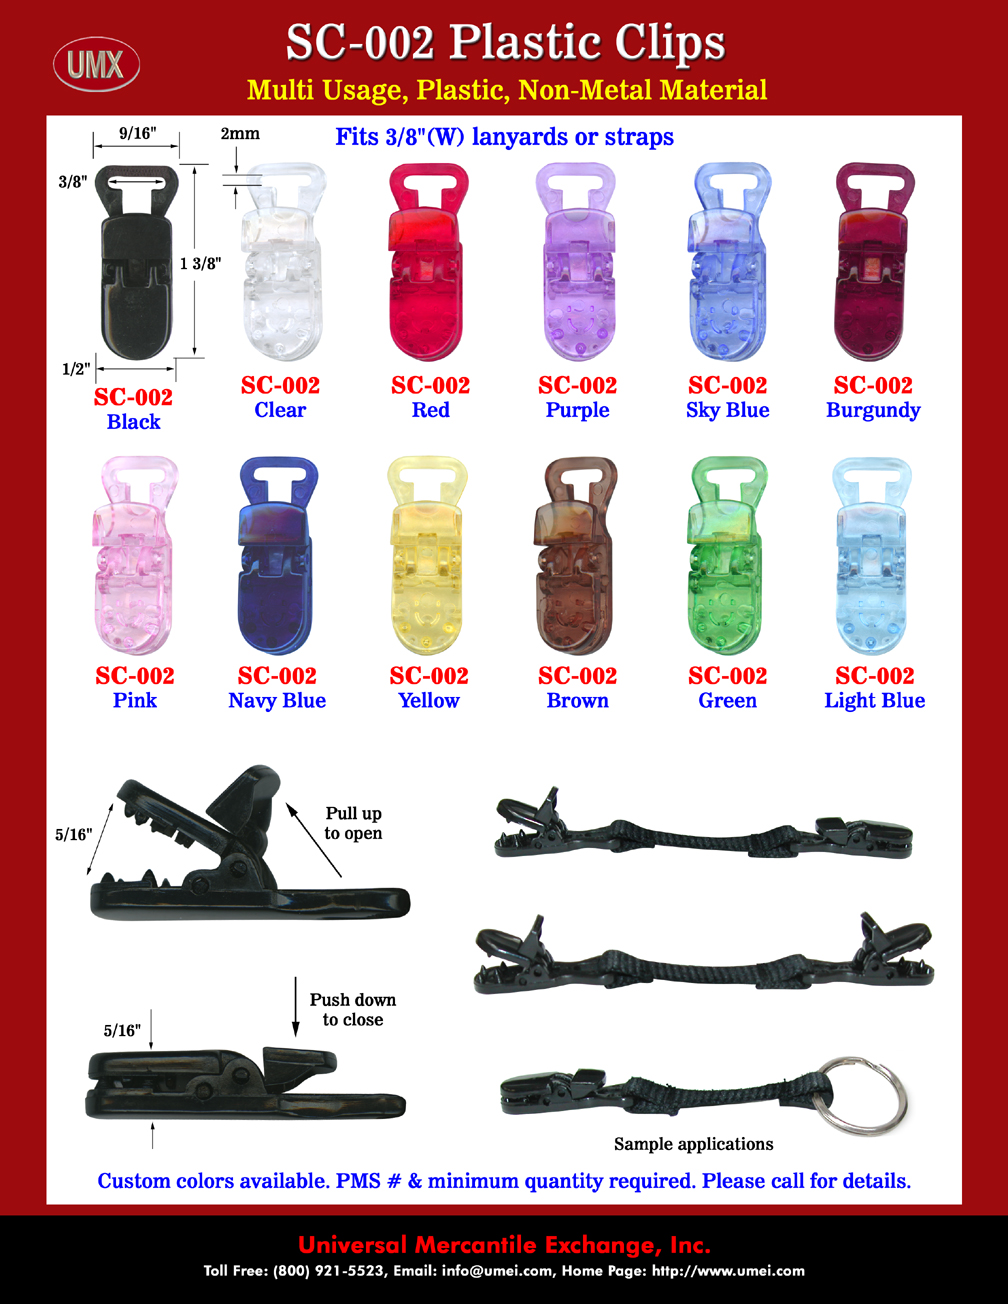 3/8" Strap Plastic Clips or Fabric Strap Clips With 12 Stylish Fashion Colors.